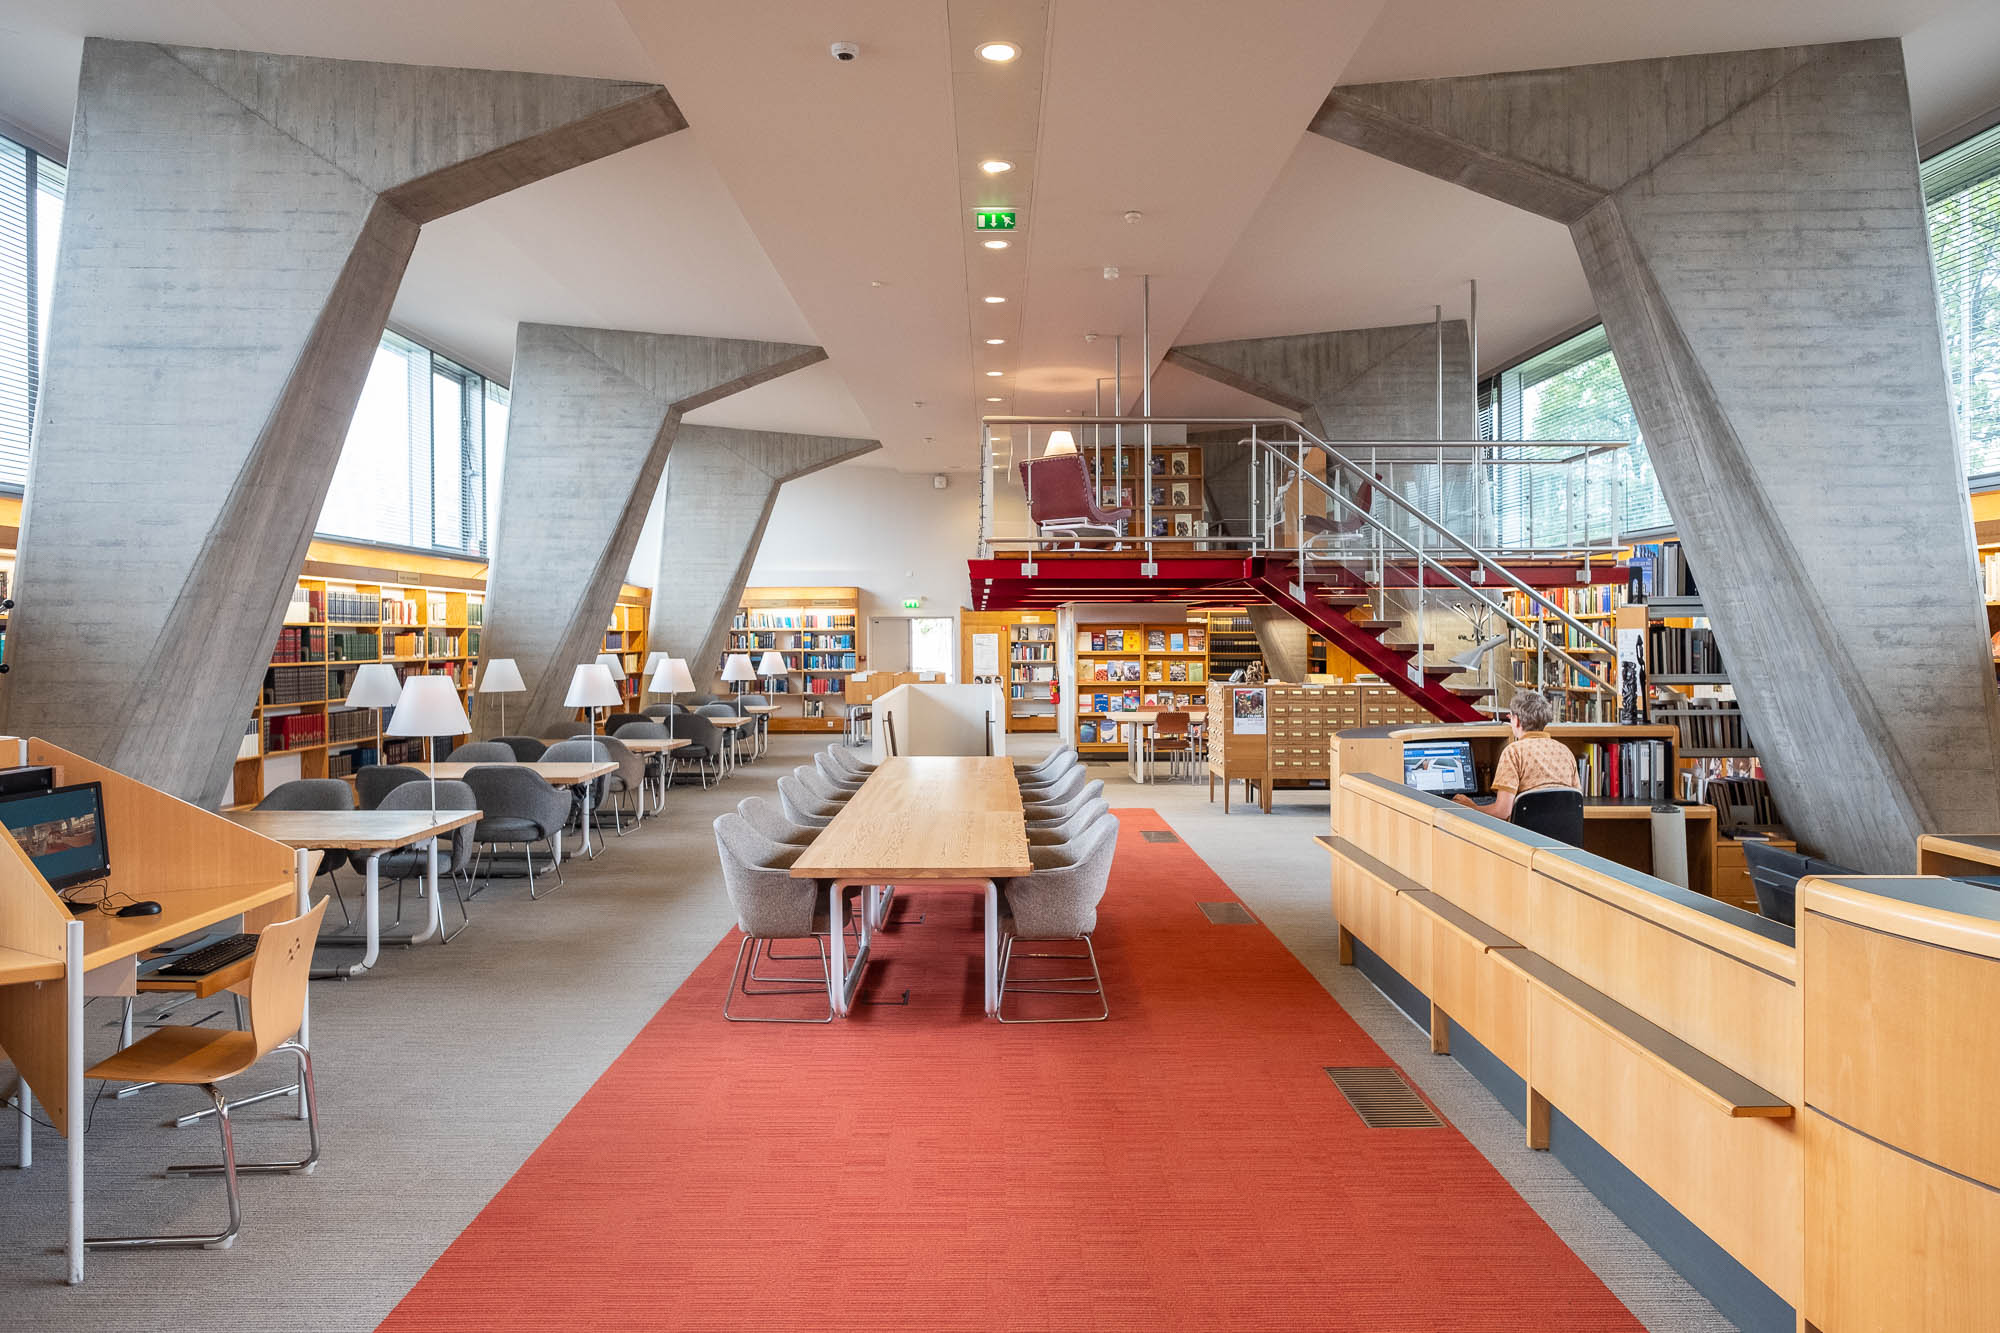 Interior of a Modernist library, a large double-height space supported by large, geometric concrete columns. At the right is the welcome desk at which a person is working at a computer, facing away from the camera.